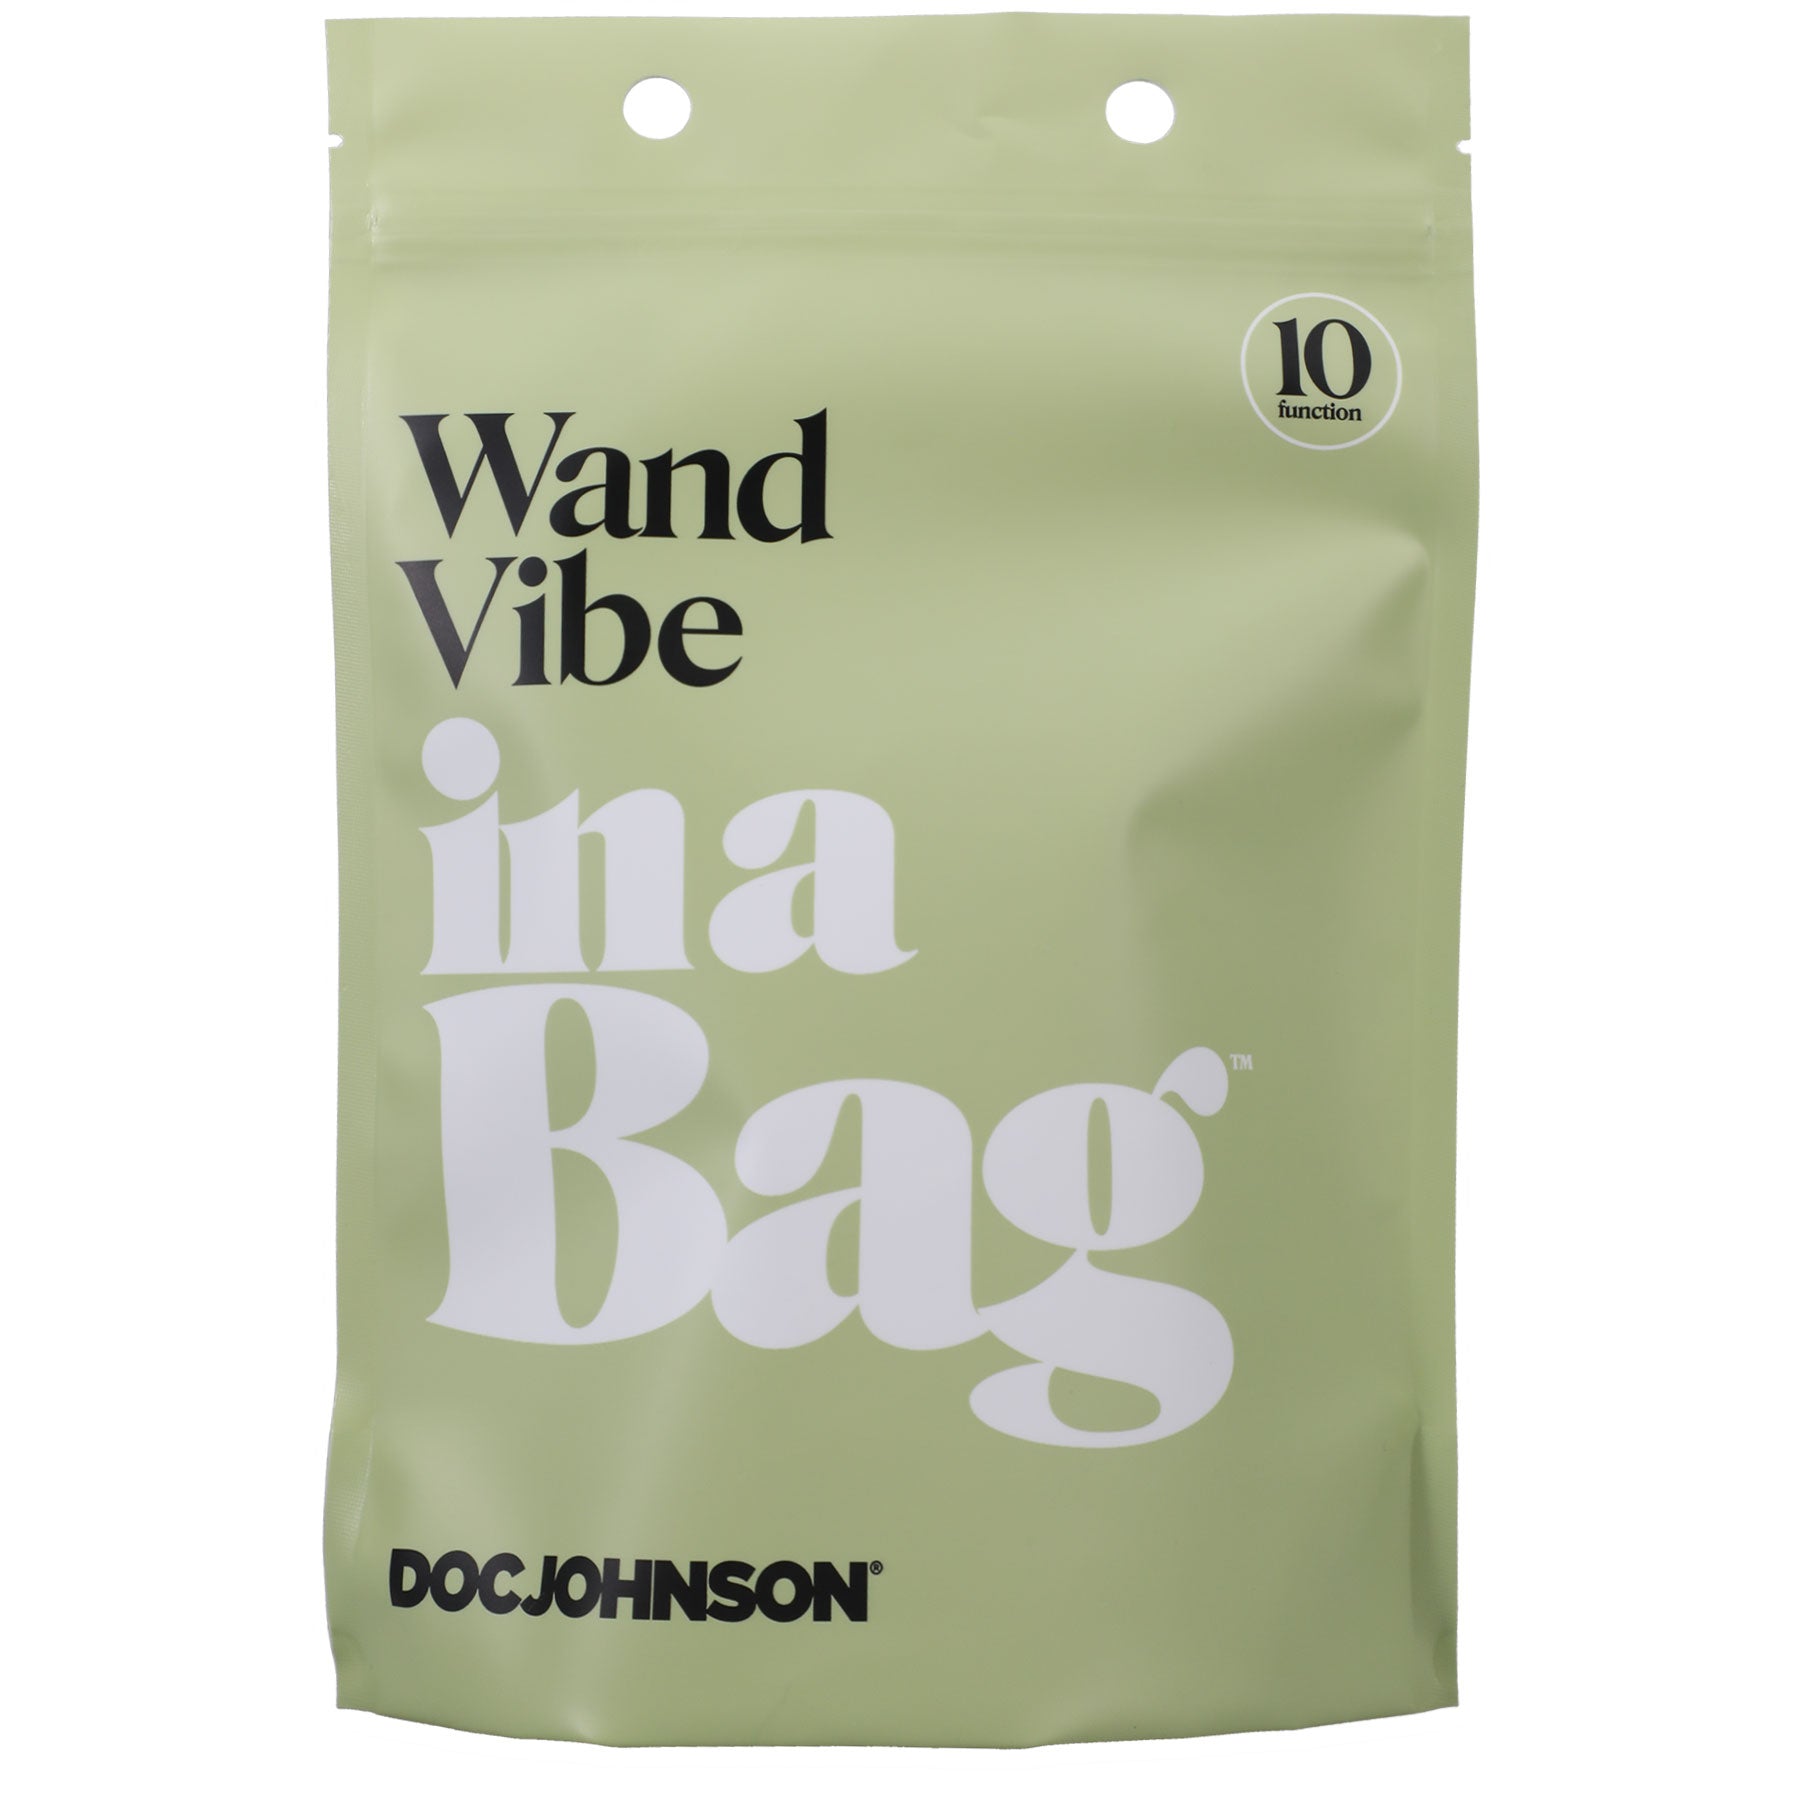 Wand Vibe in a Bag